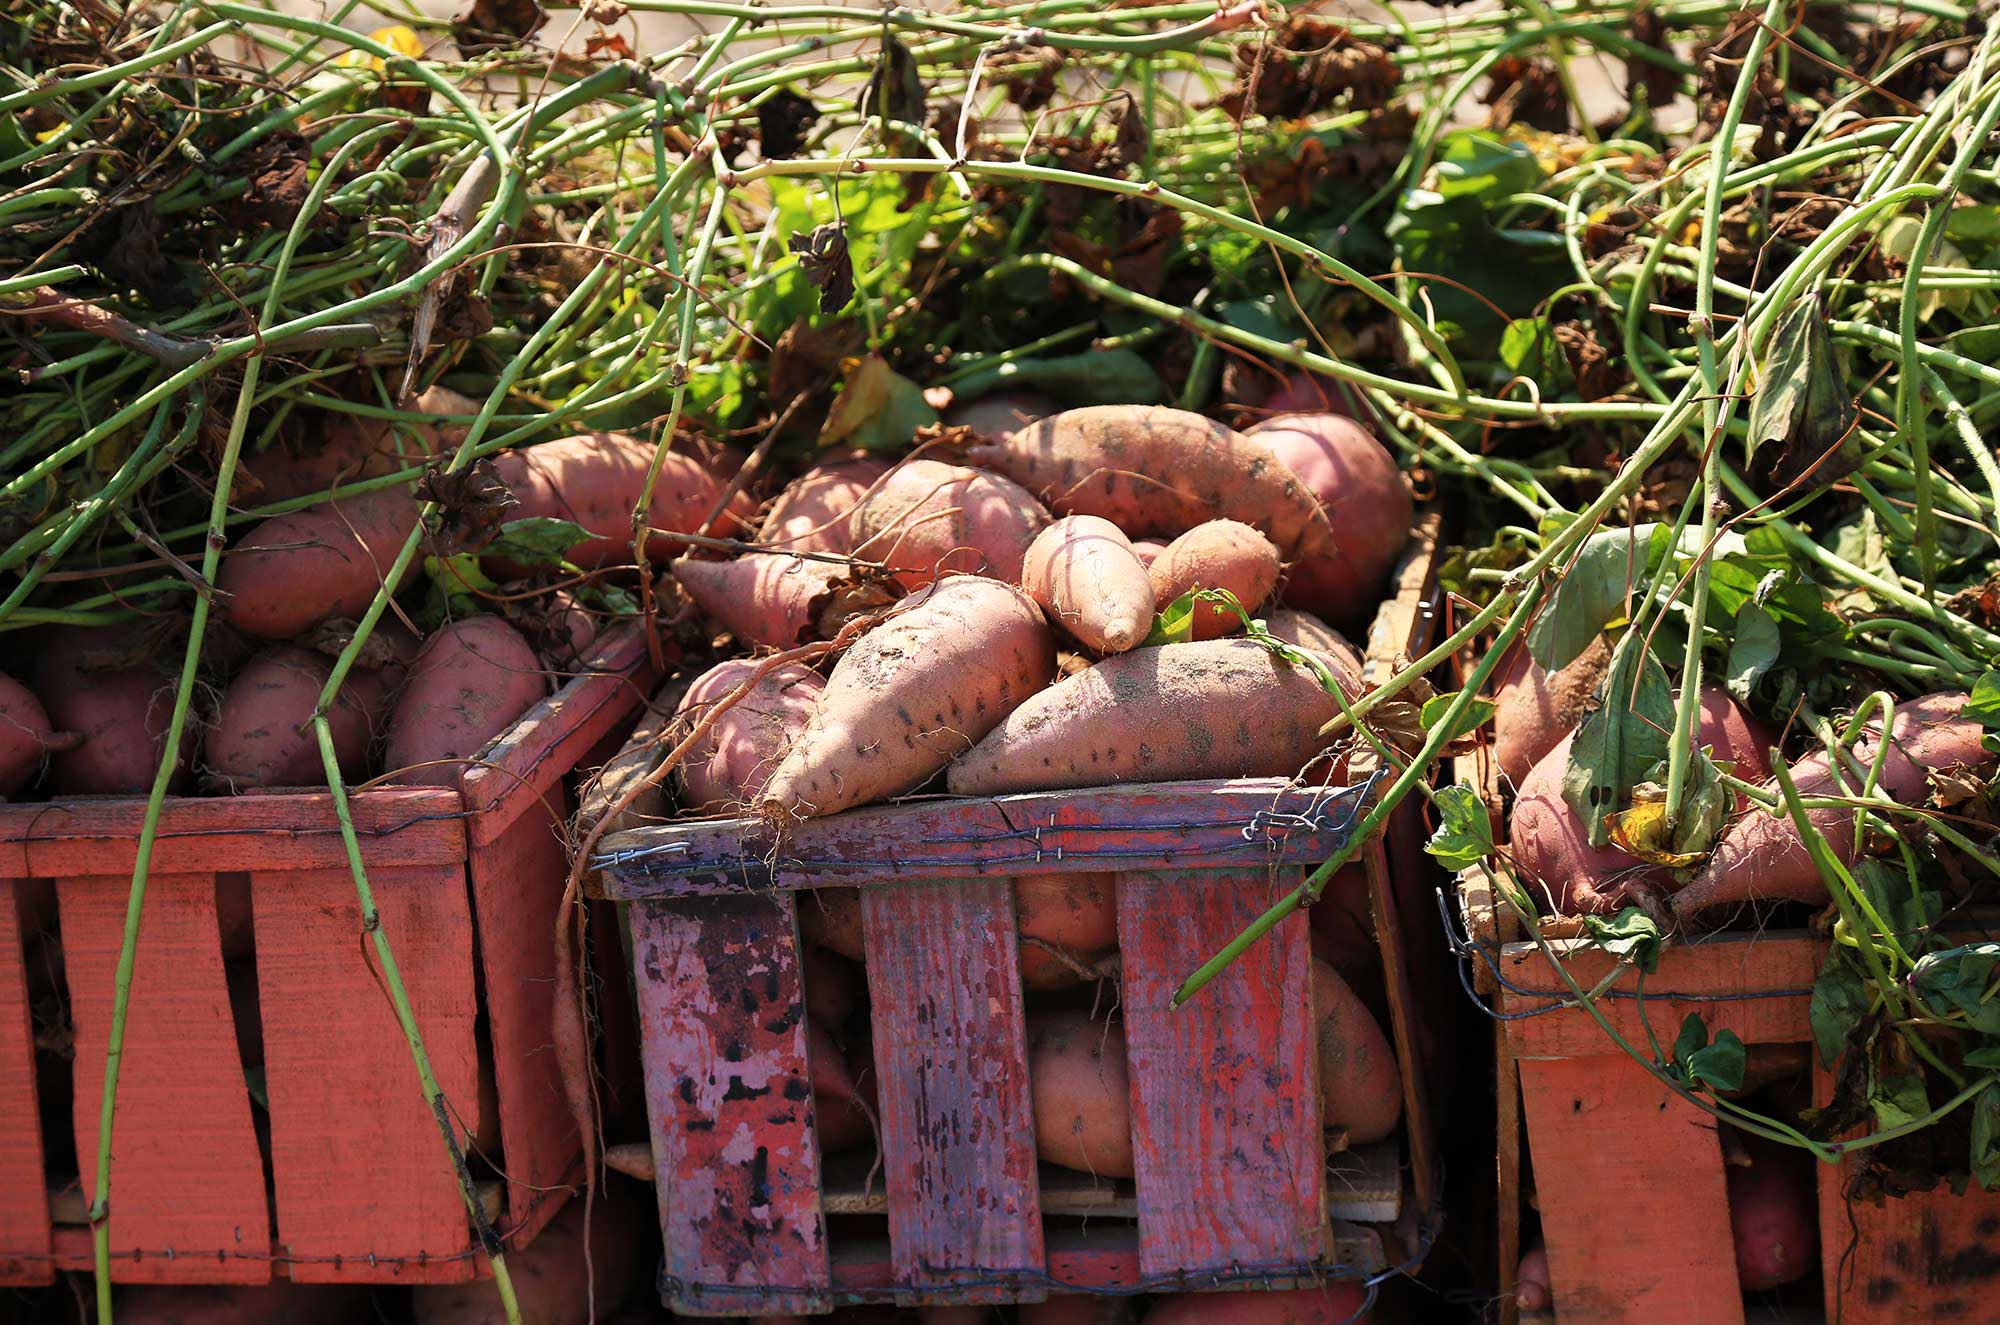 Sweet potatoes have the potential to grow abundantly in Gaza's soil.